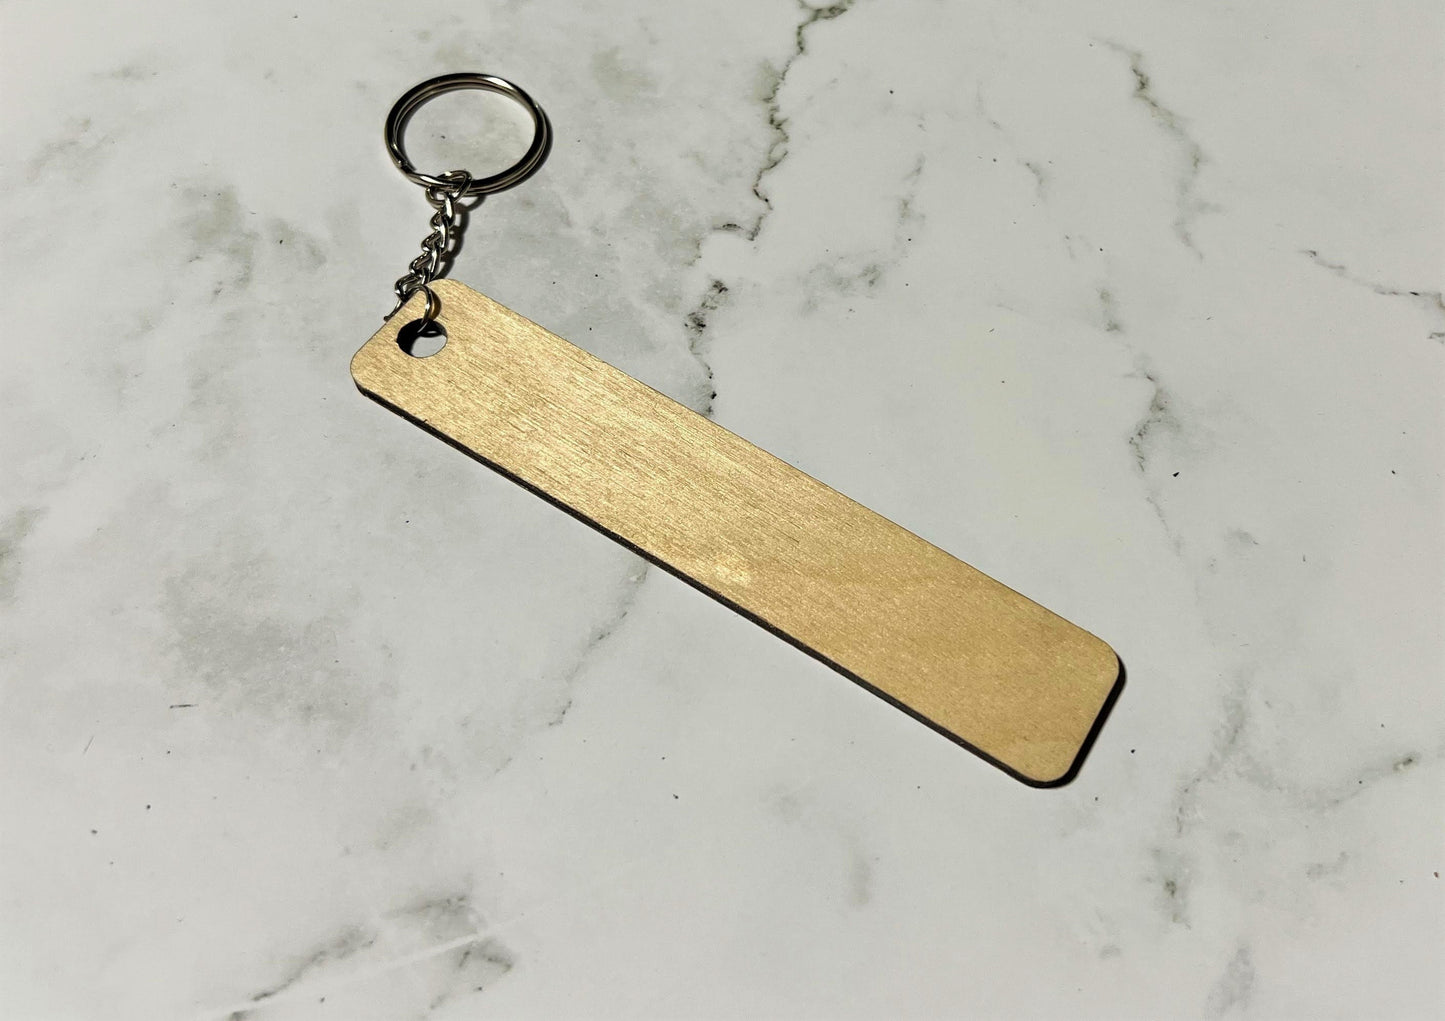 Drive Safe Keychain | Wooden Keychain | Laser Engraved | Daughter | Son | New Driver